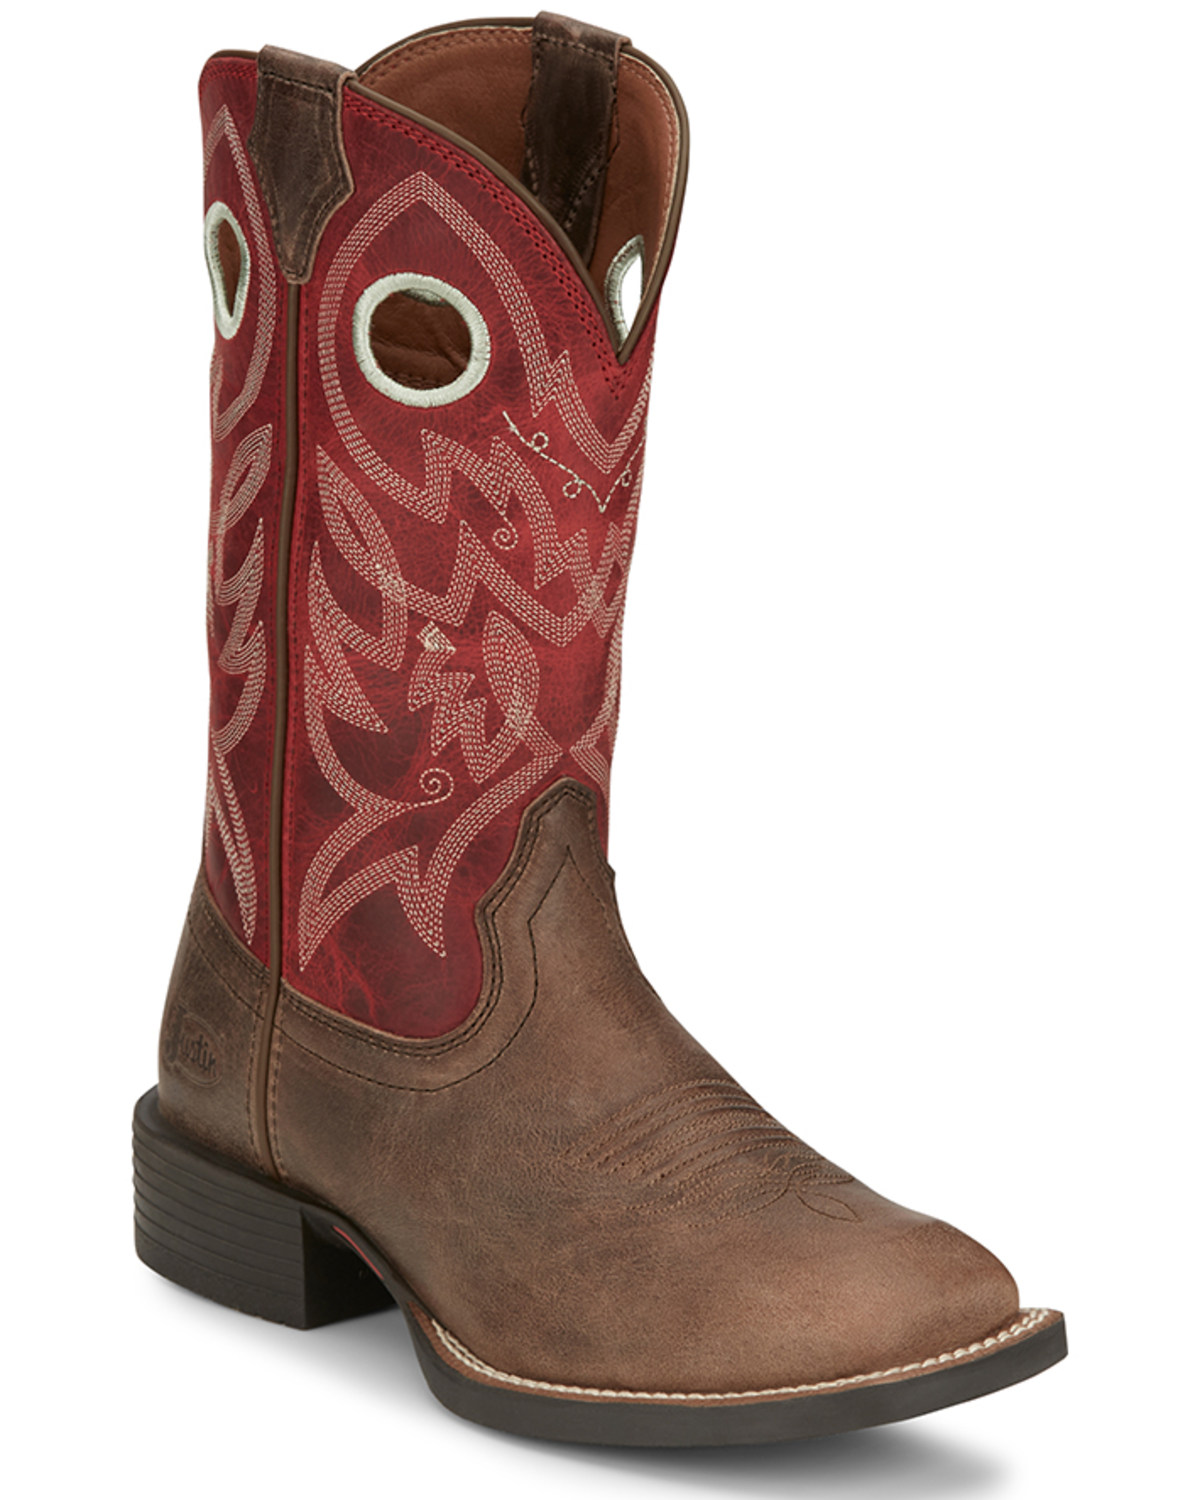 Justin Women's Liberty River Western Boots - Broad Square Toe